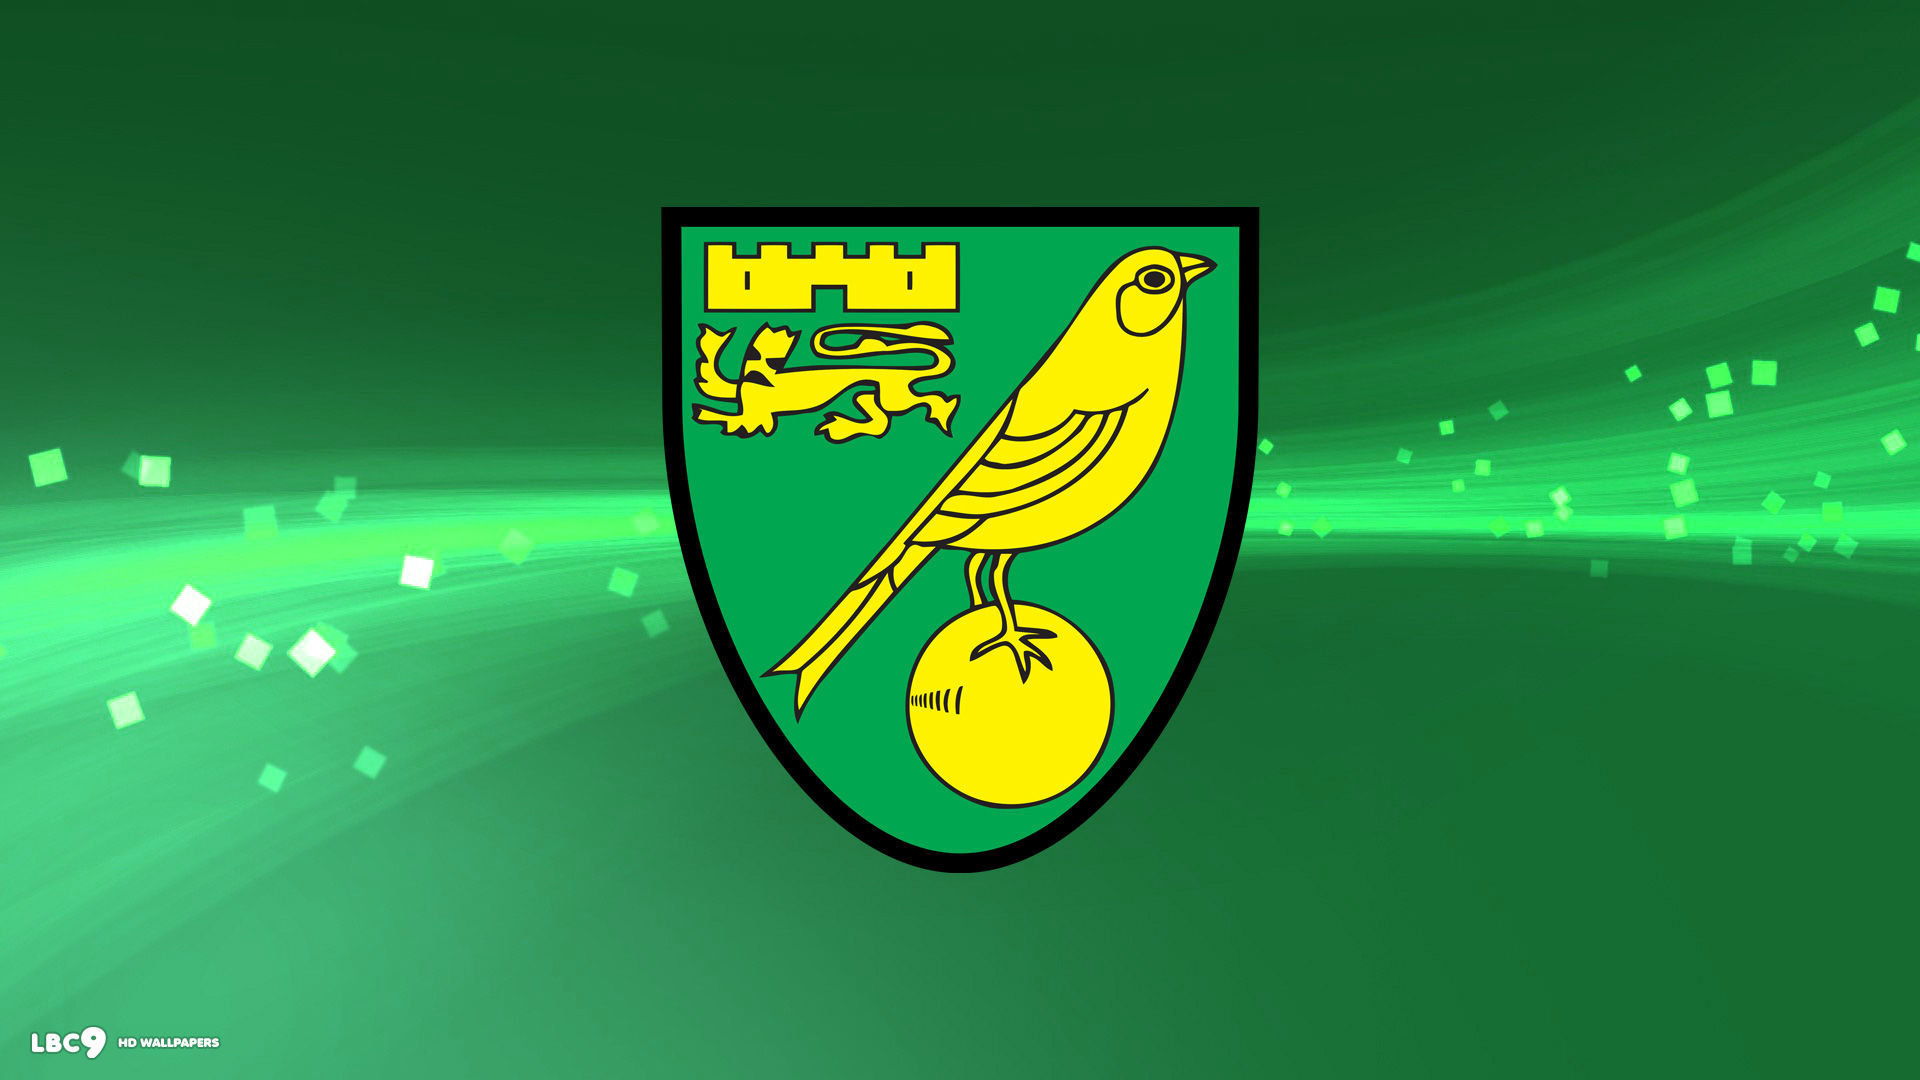 Famous Football club Norwich wallpapers and images   wallpapers